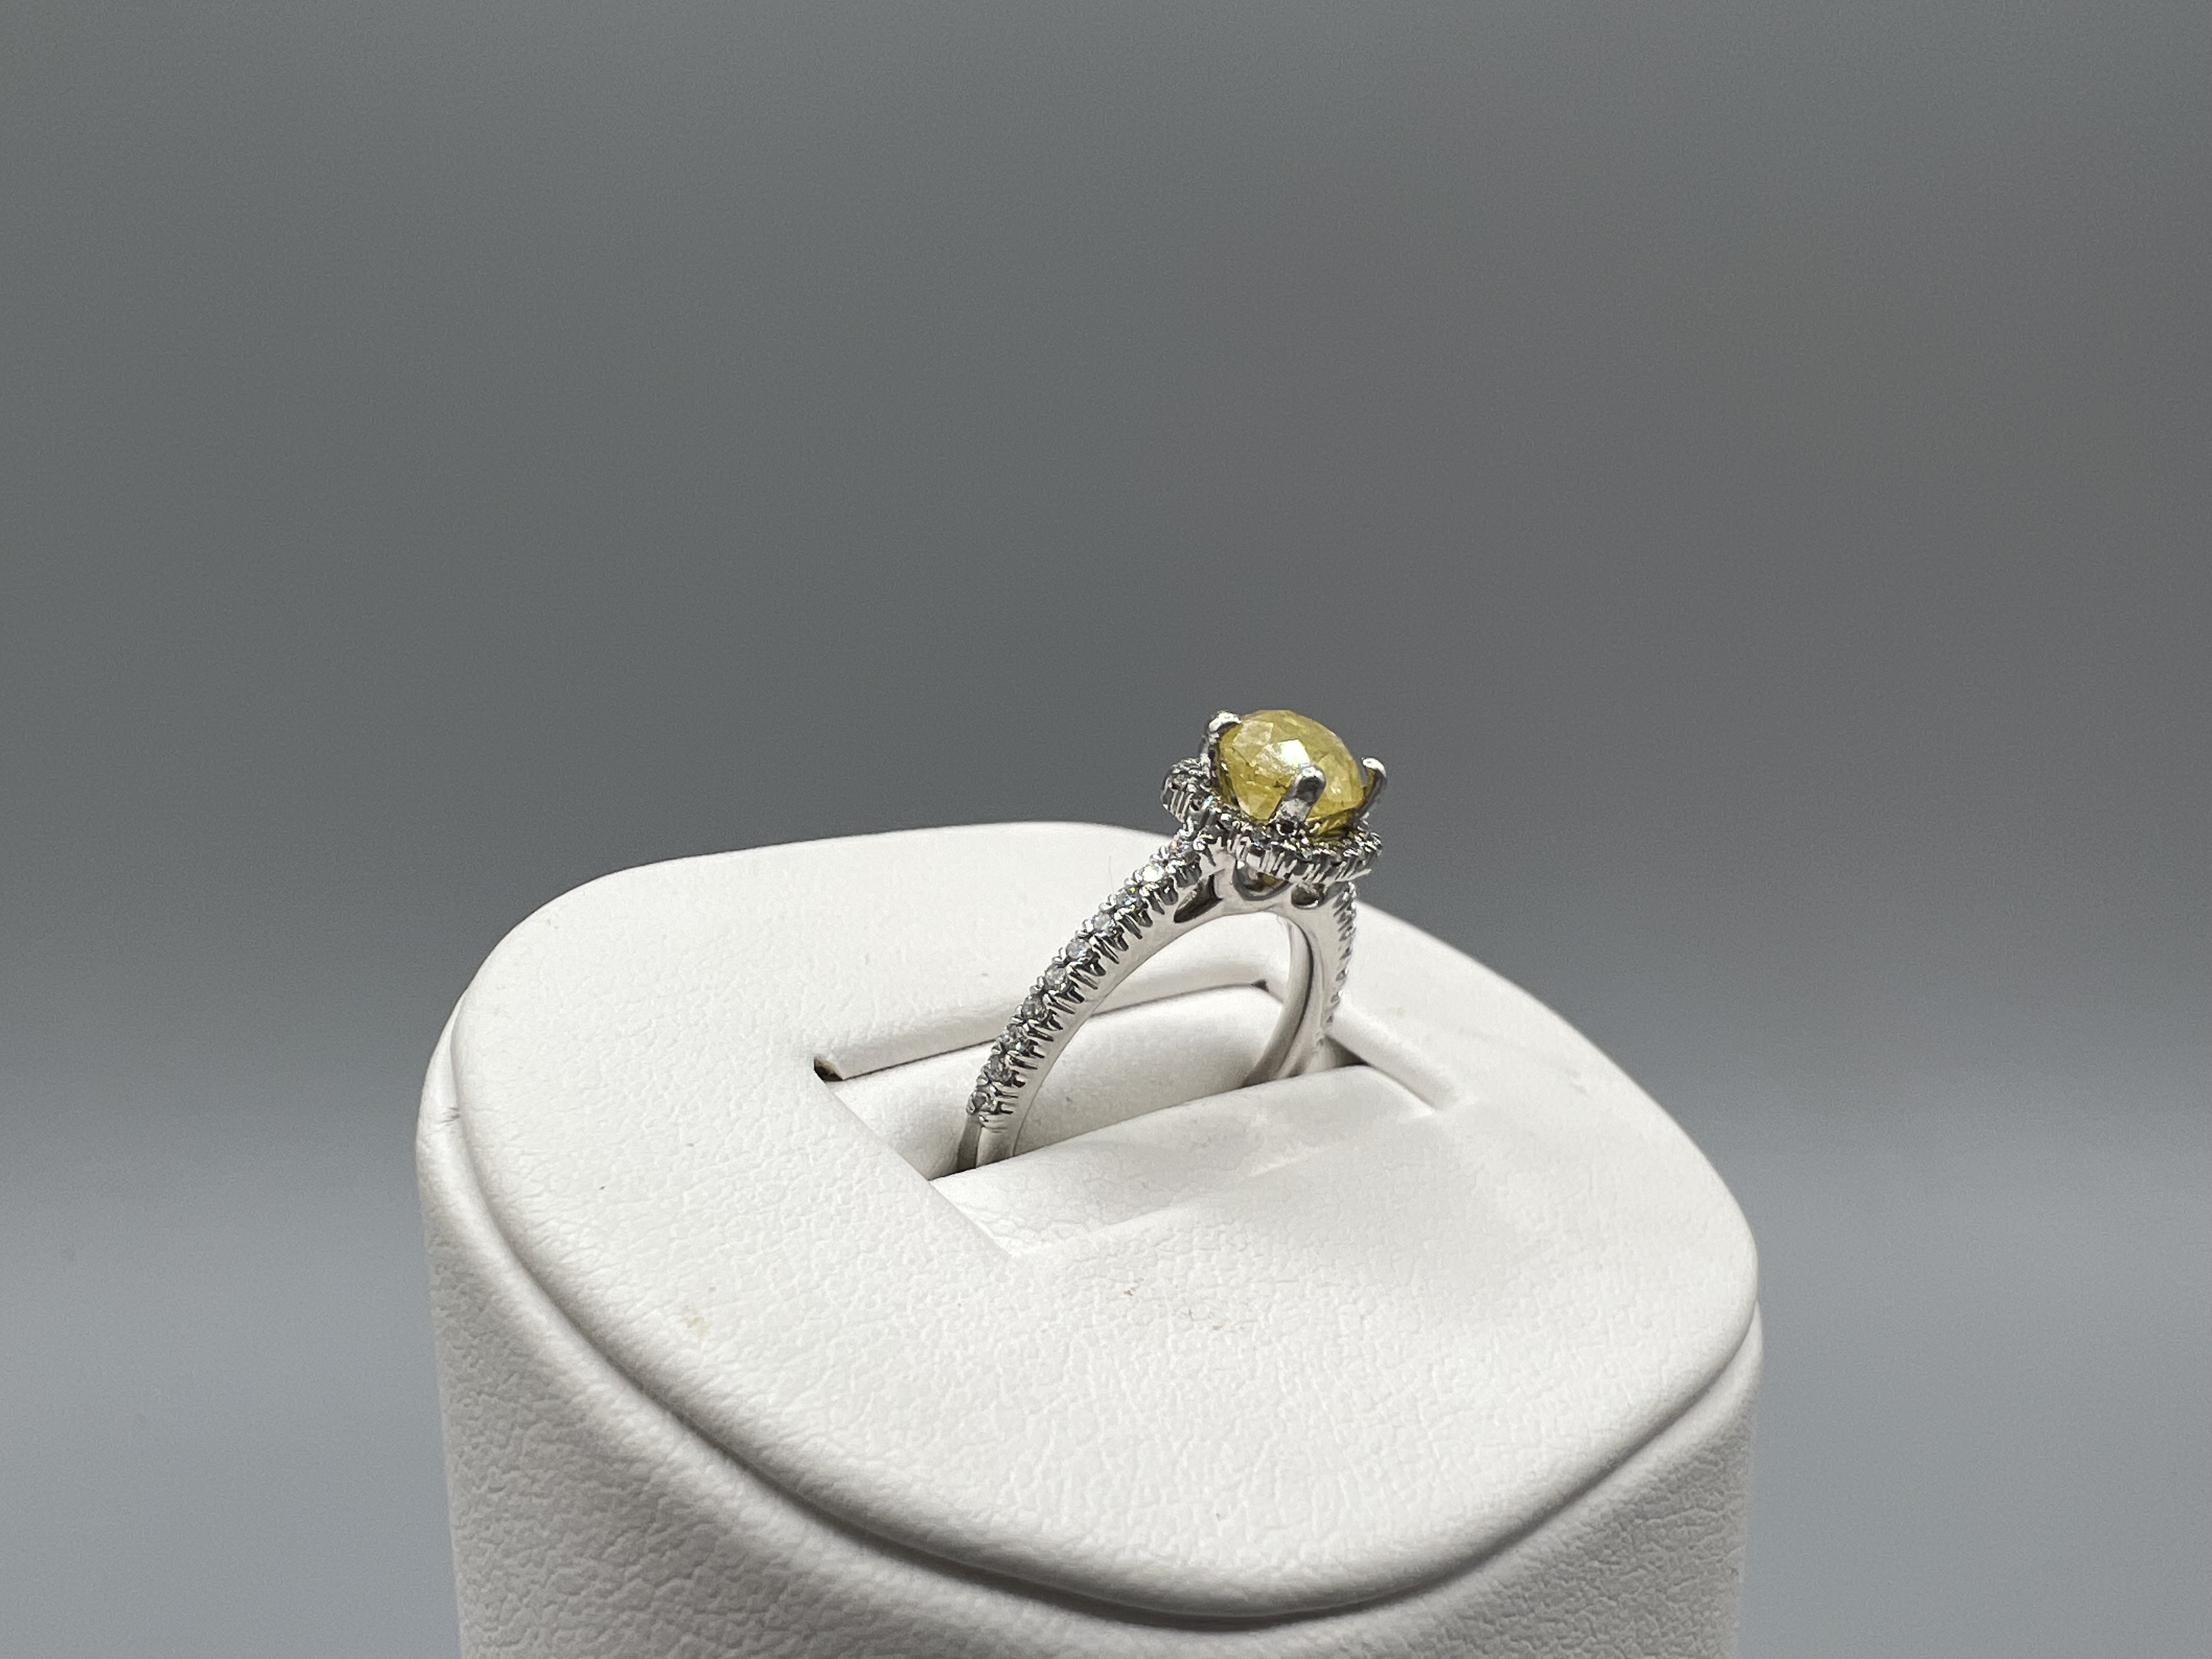 0.97ct Natural Fancy Intense Yellow Certified Diamond Ring in 14ct White Gold & Diamond Mount - - Image 2 of 4